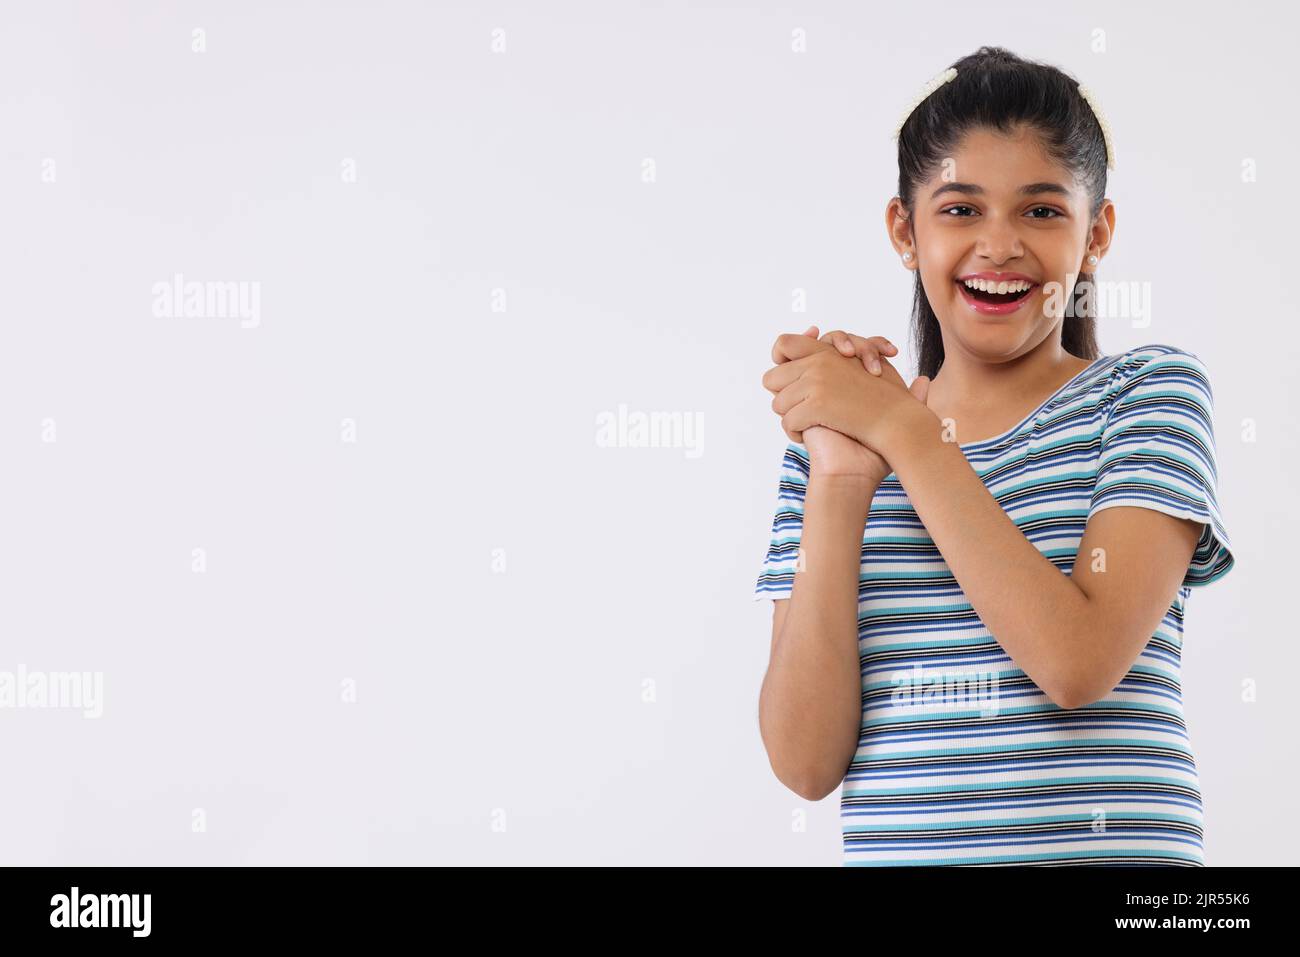 Portrait of a cheerful girl gesturing against white background Stock Photo